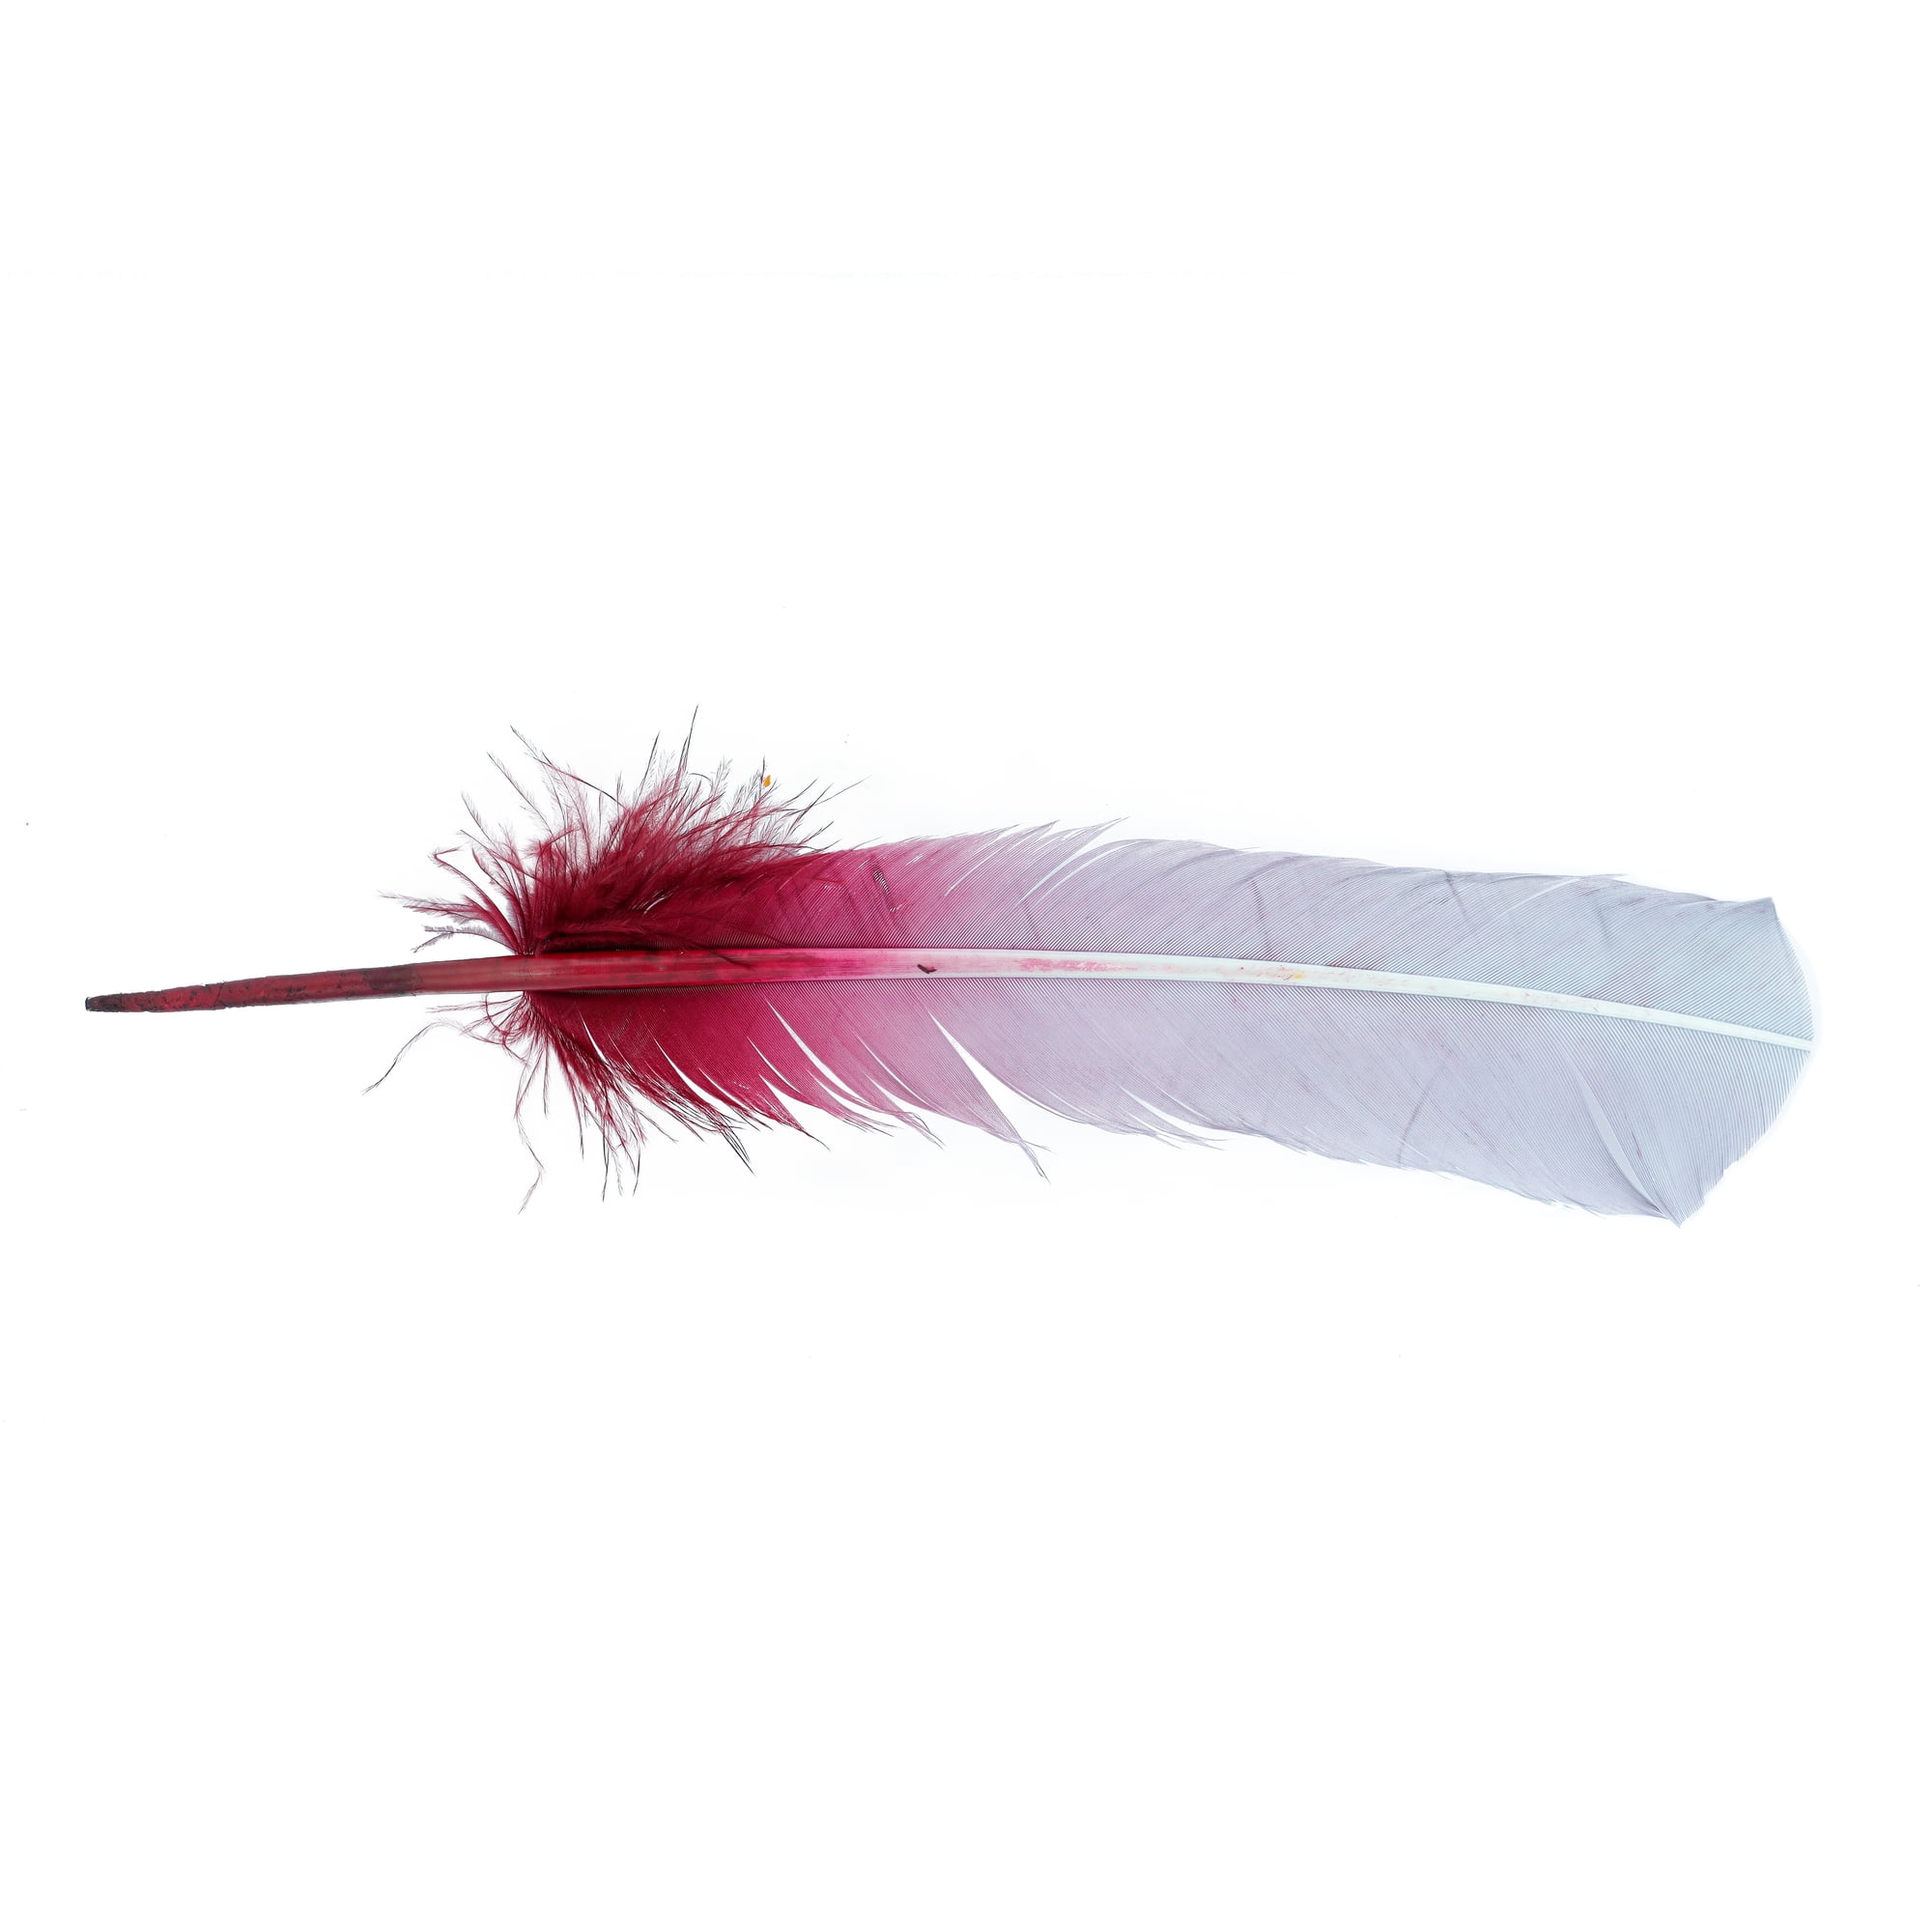 11 Color 10-12 inch Turkey Quill Feathers 20 pcs, Primary Wing Quill Large  Feathers Left Side Craft Costume, Wholesale Feather Supplier (Dark Brown